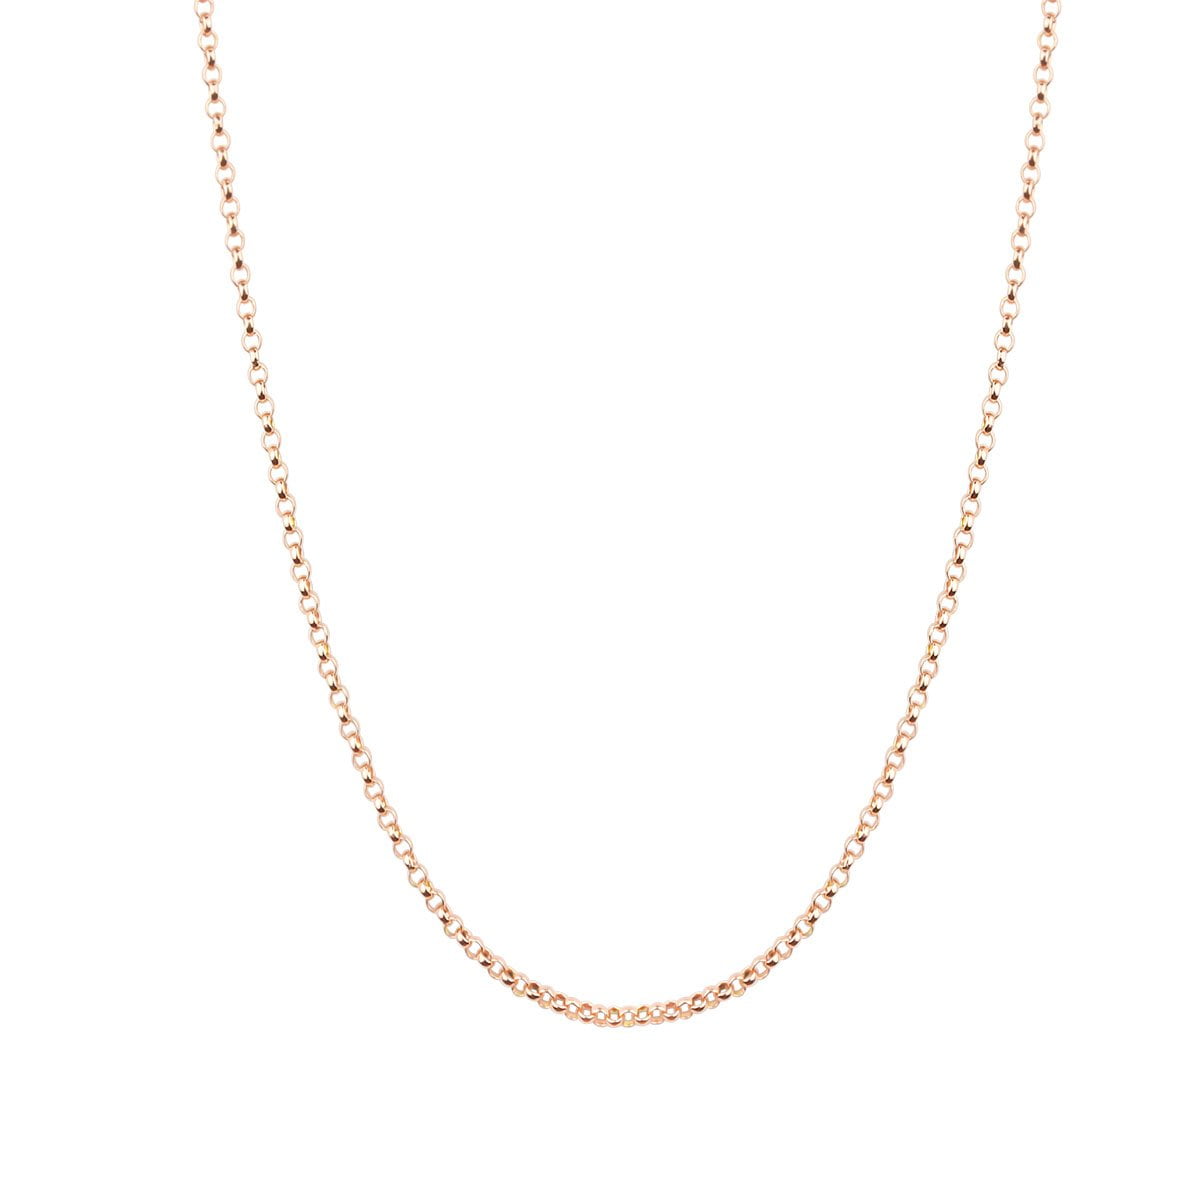 Noemi 18ct Rose Gold Belcher Chain Necklace